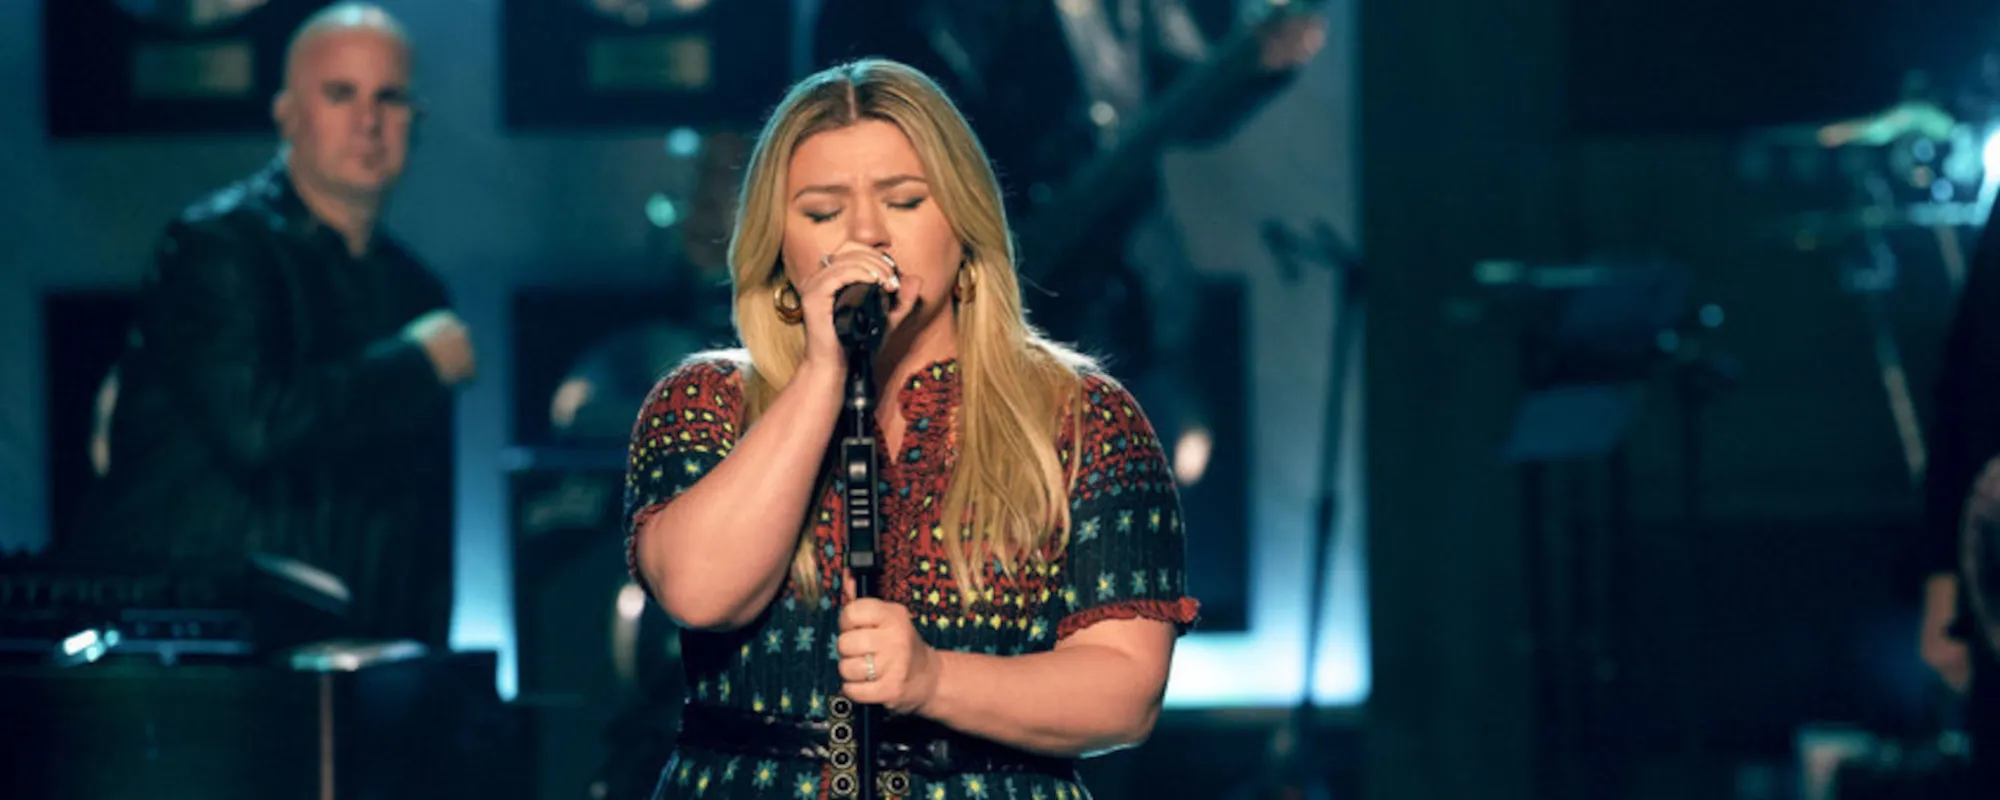 Kelly Clarkson Covers Lenny Kravitz, Dermot Kennedy, and Peaches & Herb in Latest ‘Kellyoke’